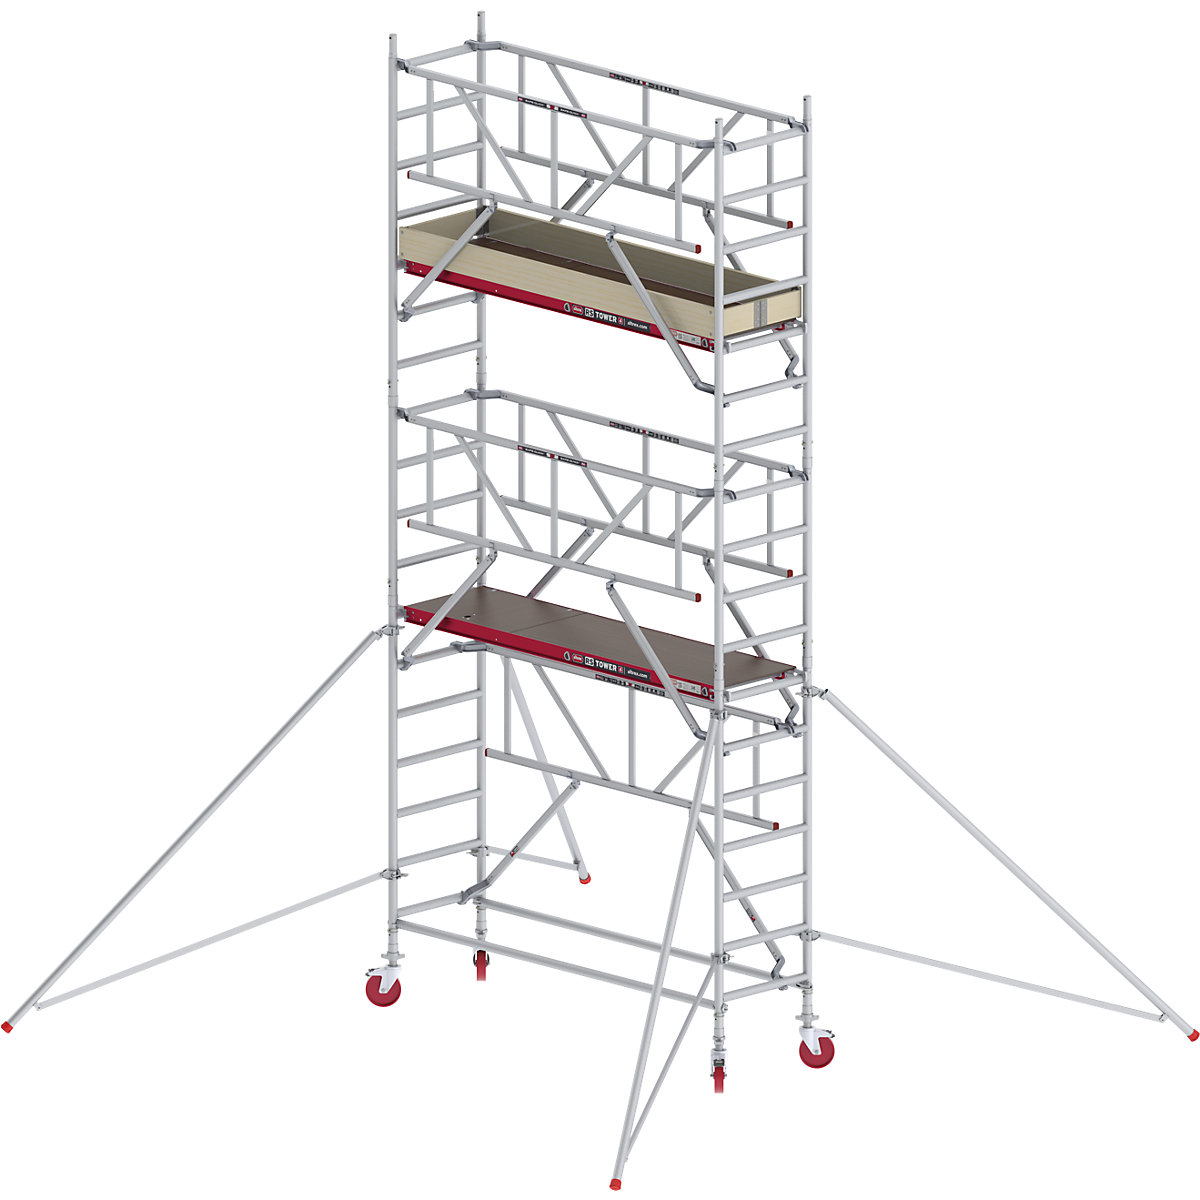 RS TOWER 41 slim mobile access tower with Safe-Quick® – Altrex, wooden platform, length 2.45 m, working height 6.20 m-6